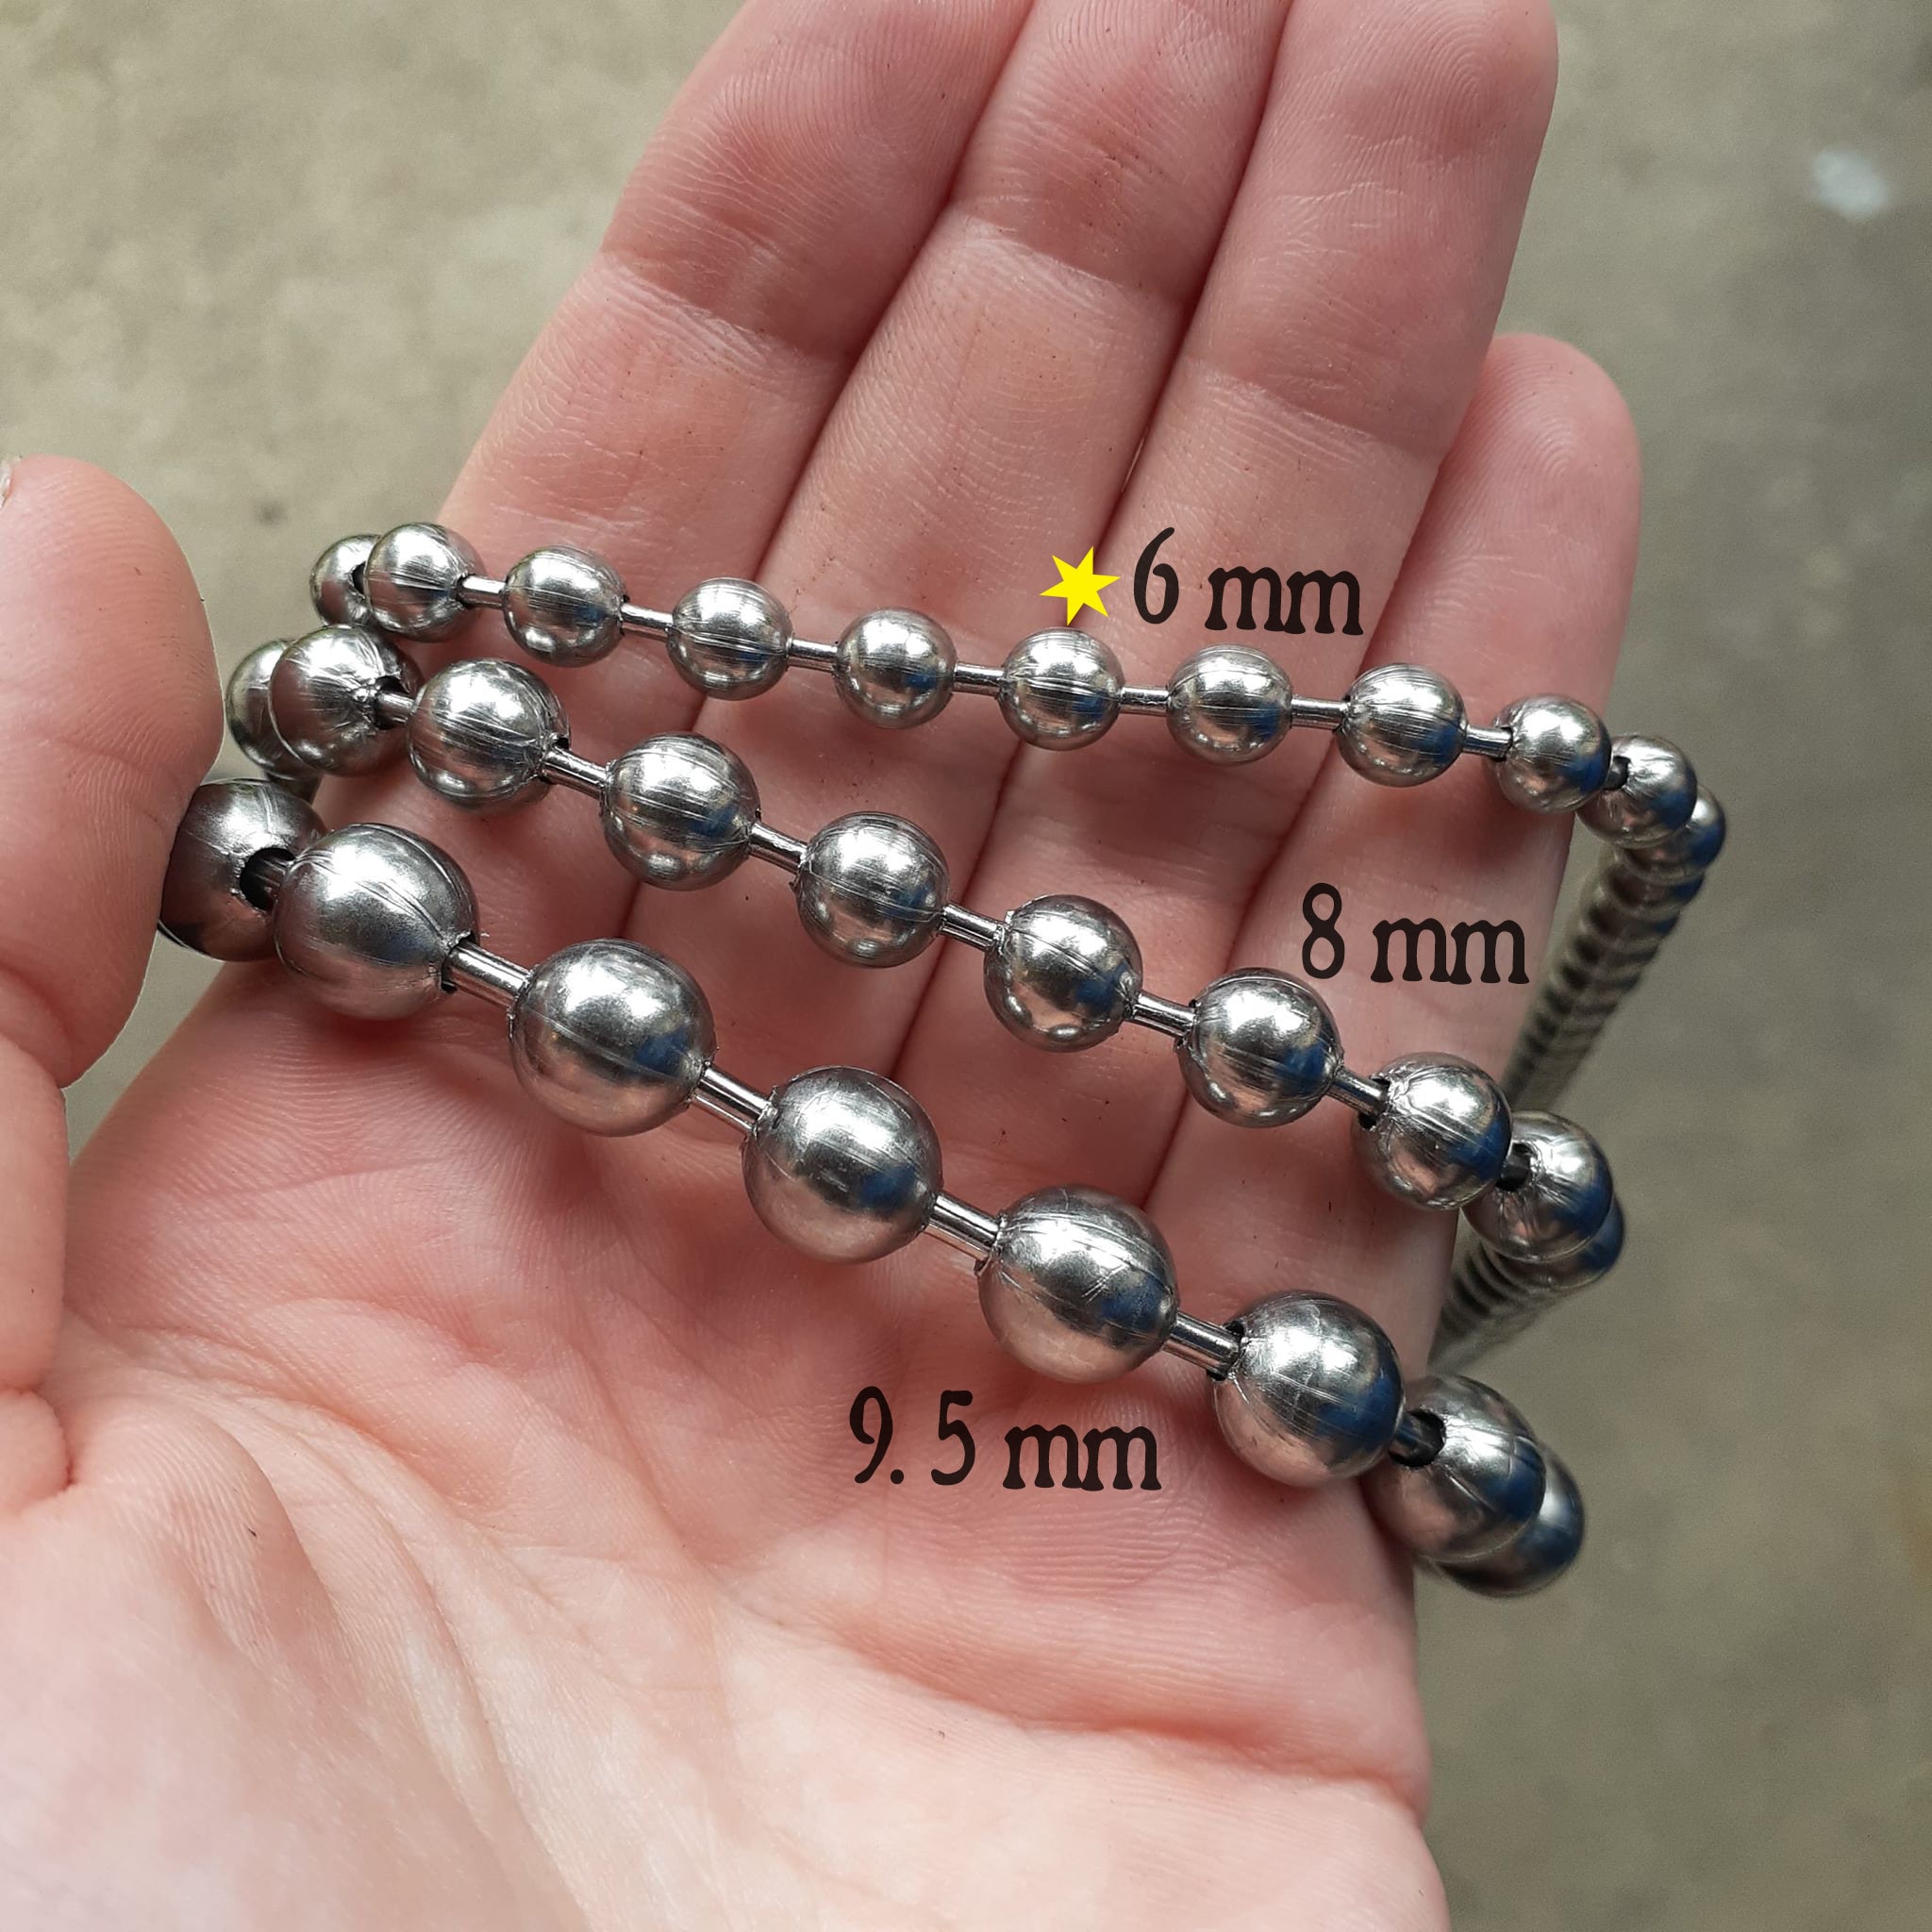 Ball Beads Chain With Connectors Clasps, Metal Beaded Necklace